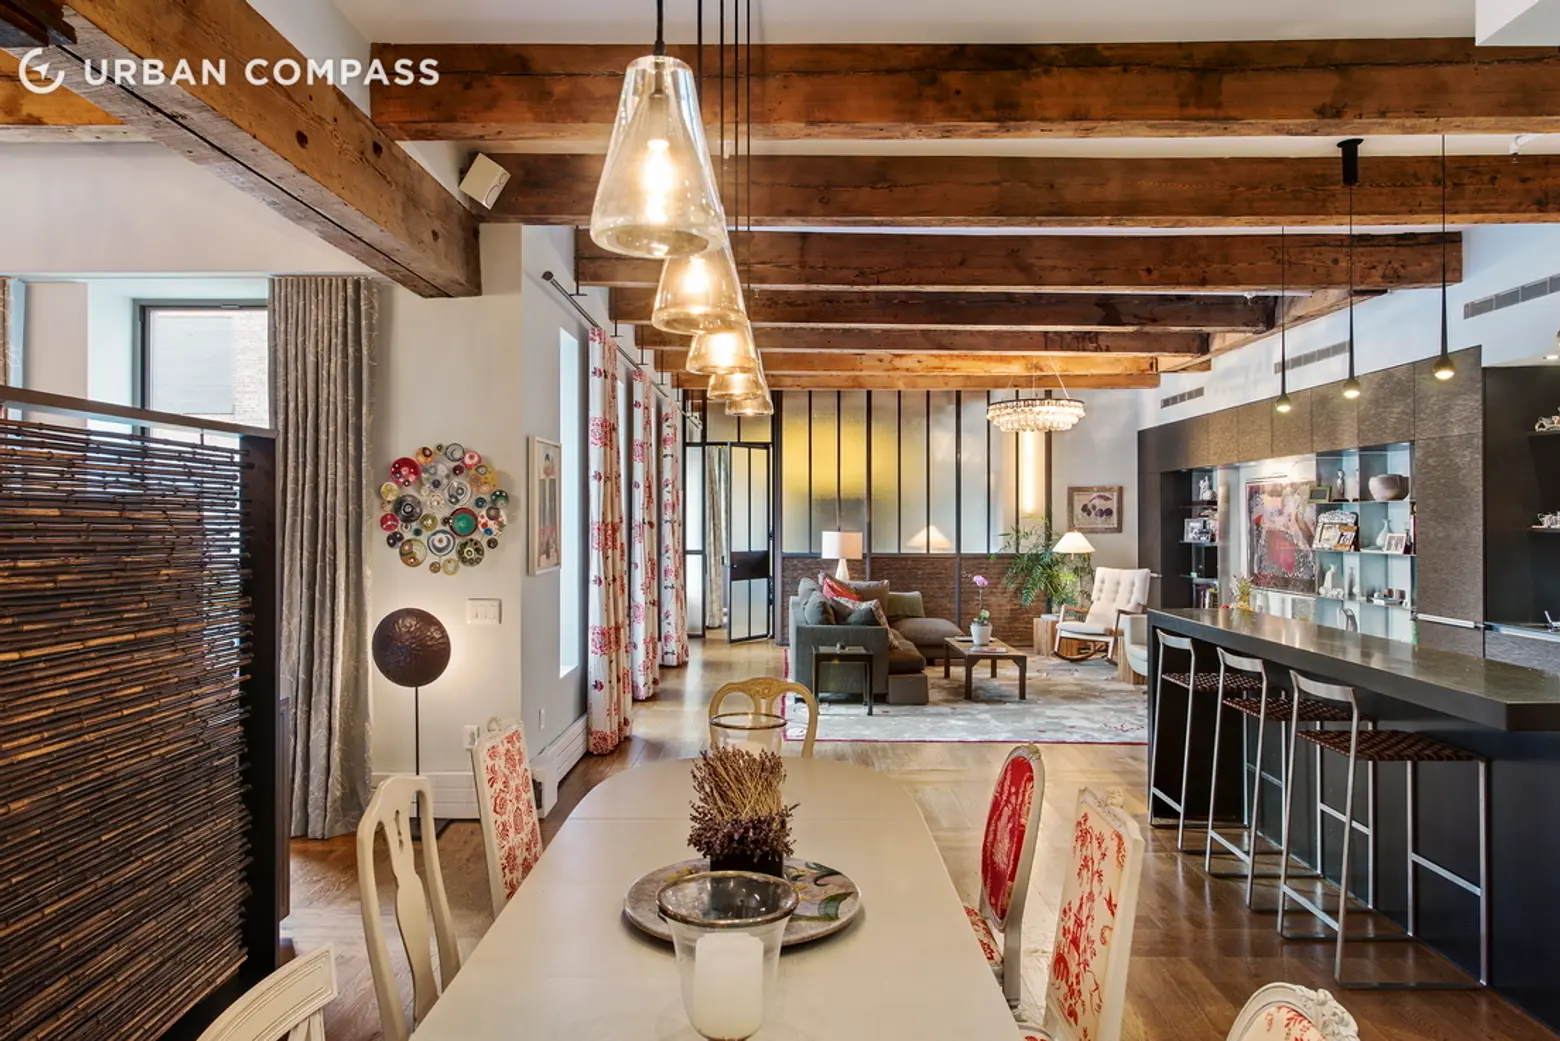 Exquisite West Chelsea Loft Designed by 212box Architecture ‘Suits to a T’ at $5.9M